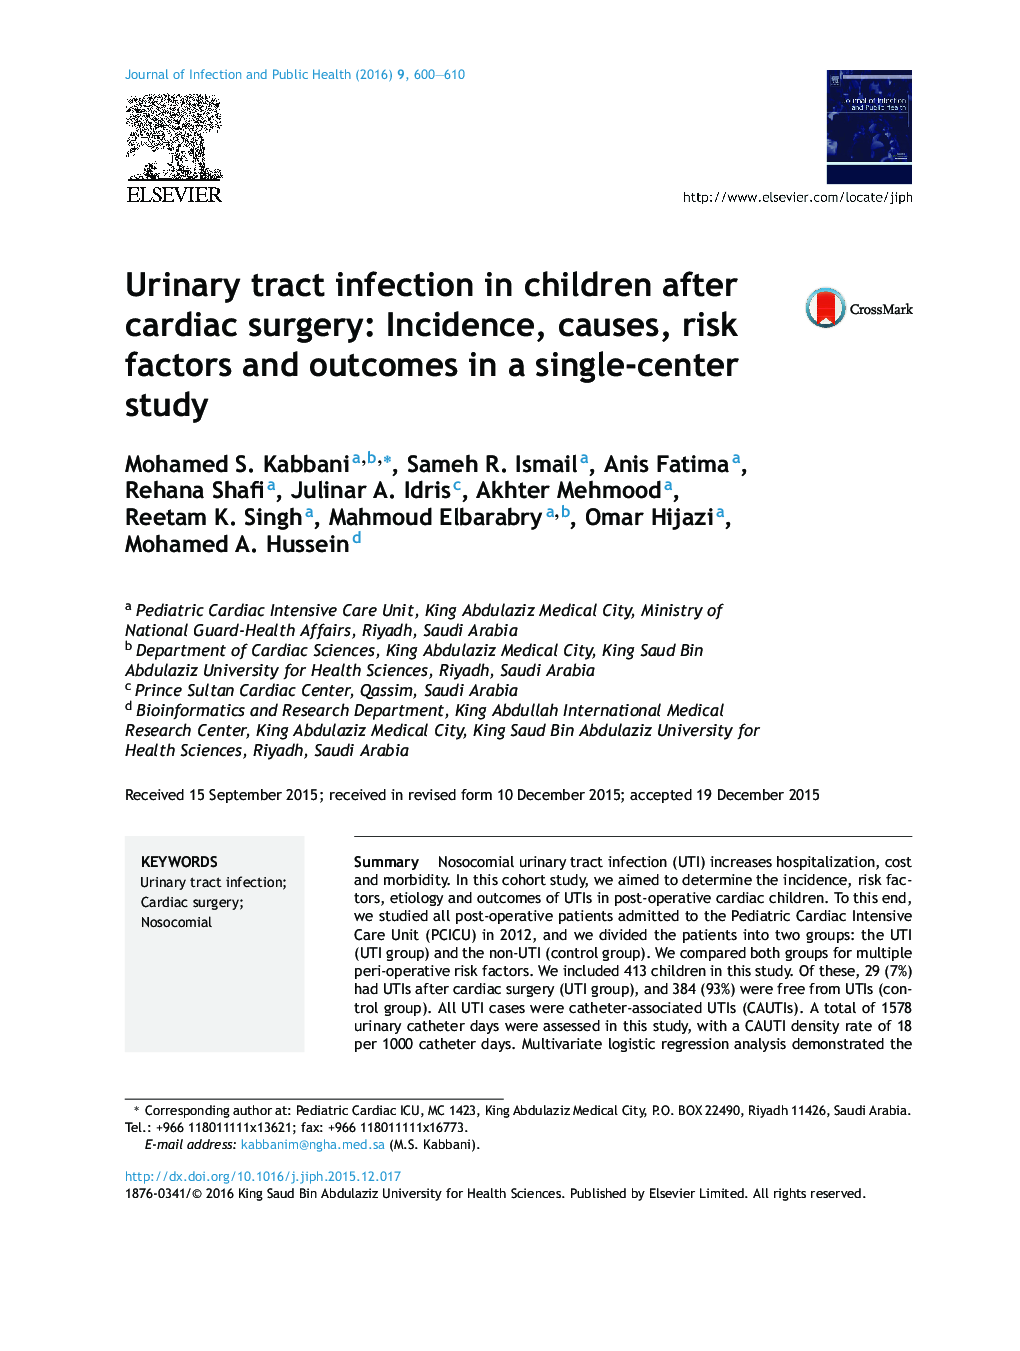 Urinary tract infection in children after cardiac surgery: Incidence, causes, risk factors and outcomes in a single-center study